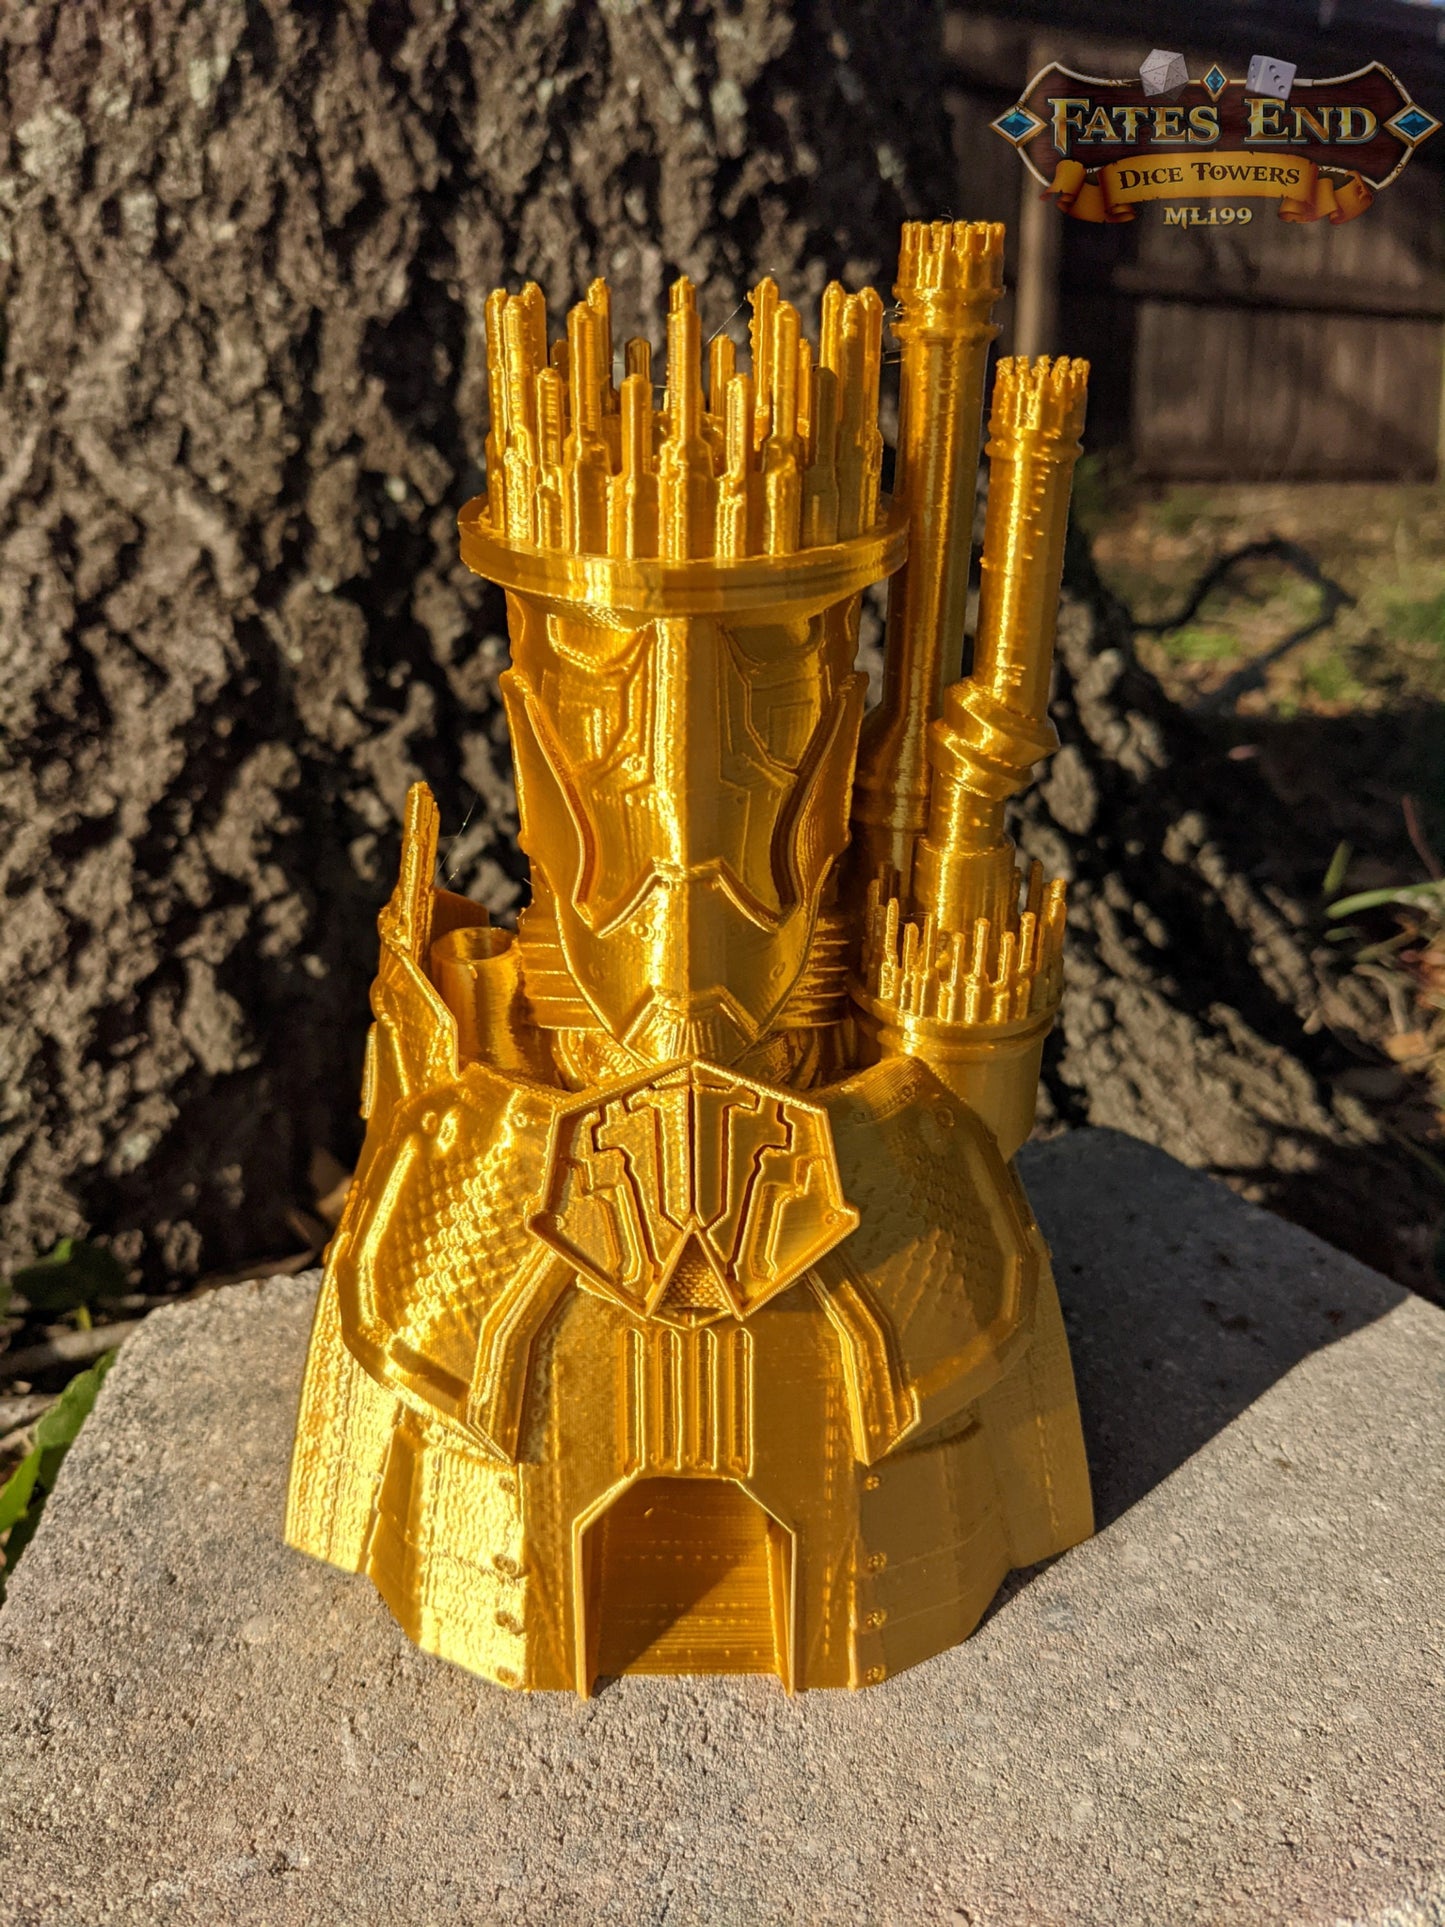 Warforged Steampunk 3D Printed Dice Tower - Fate's End Collection - Forge Rolls in the Crucible of Mechanized Might and Living Steel.